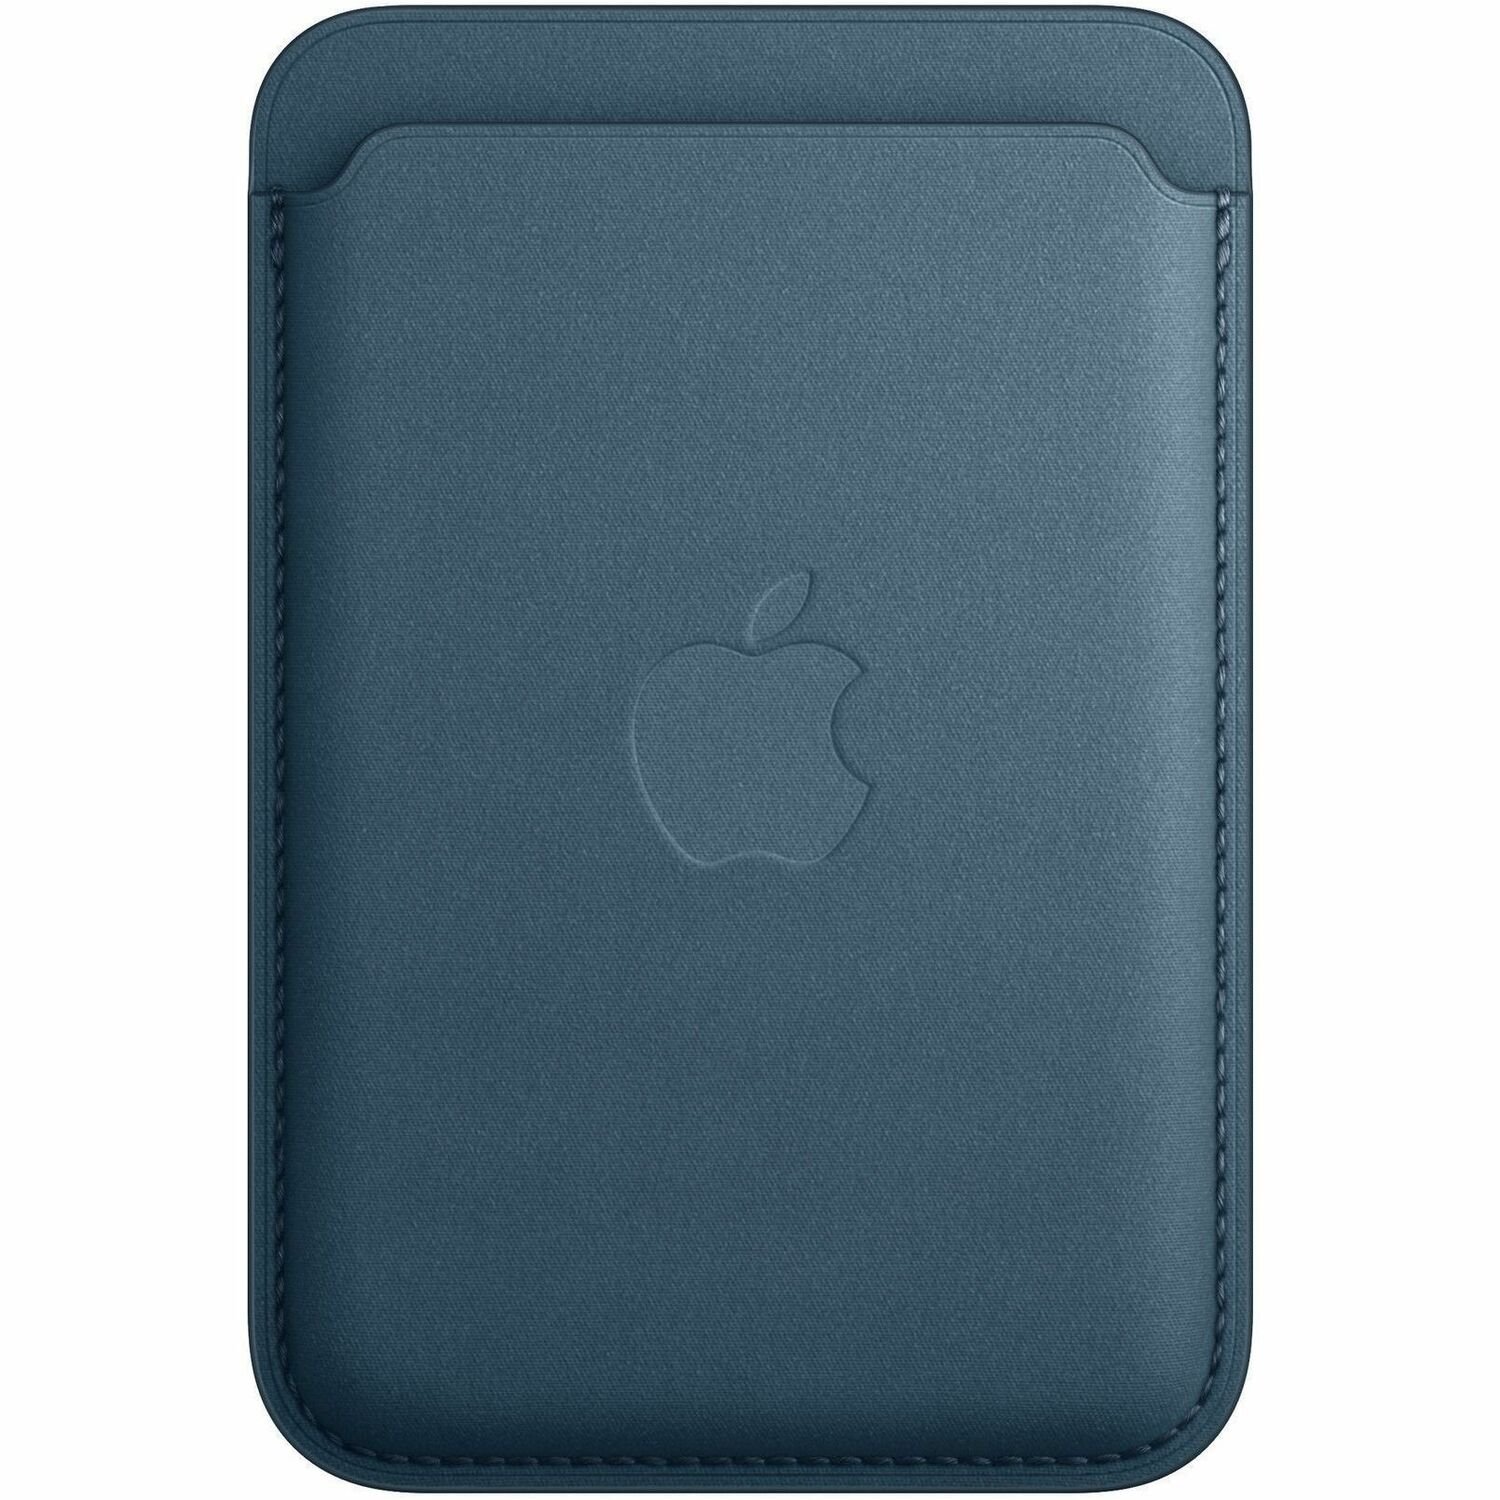 Apple Carrying Case (Wallet) Apple iPhone 15 Pro, iPhone 15 Pro Max, iPhone 15, iPhone 15 Plus, iPhone 14, iPhone 14 Pro, iPhone 14 Plus, iPhone 14 Pro Max, iPhone 13 Pro, iPhone 13 Pro Max, iPhone 13 mini, ... Smartphone, ID Card - Pacific Blue